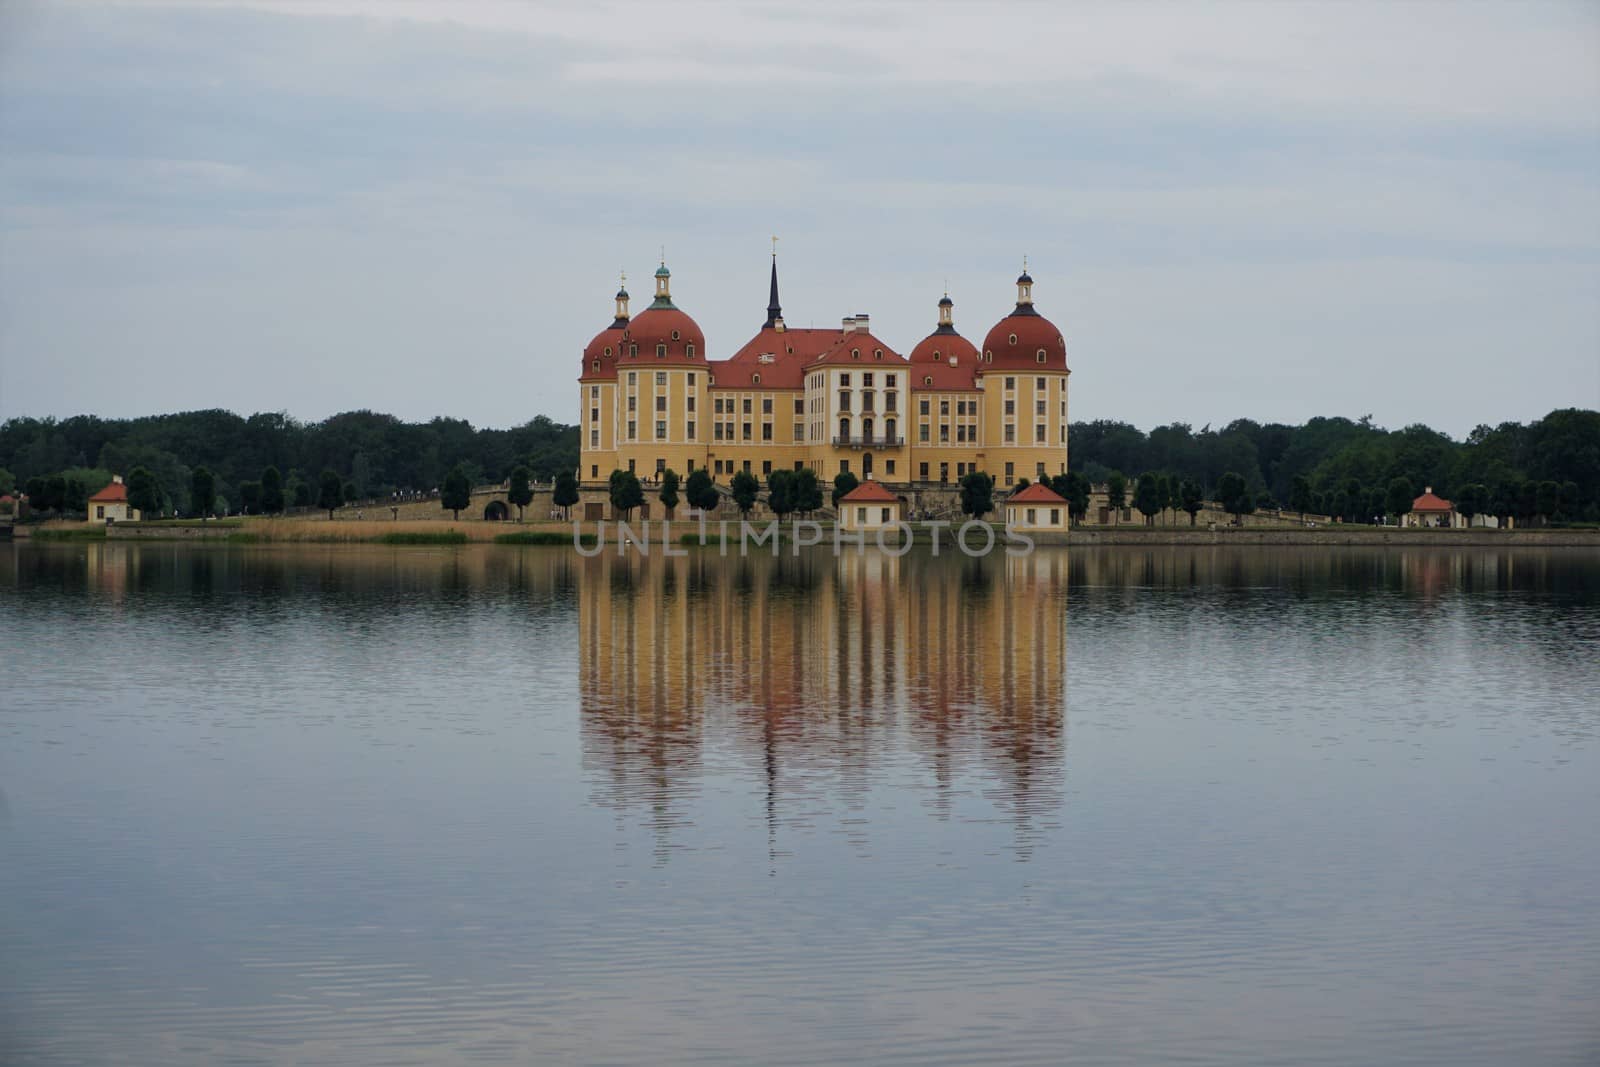 Moritzburg palace and beautiful reflections of the castle in the surrounding lake